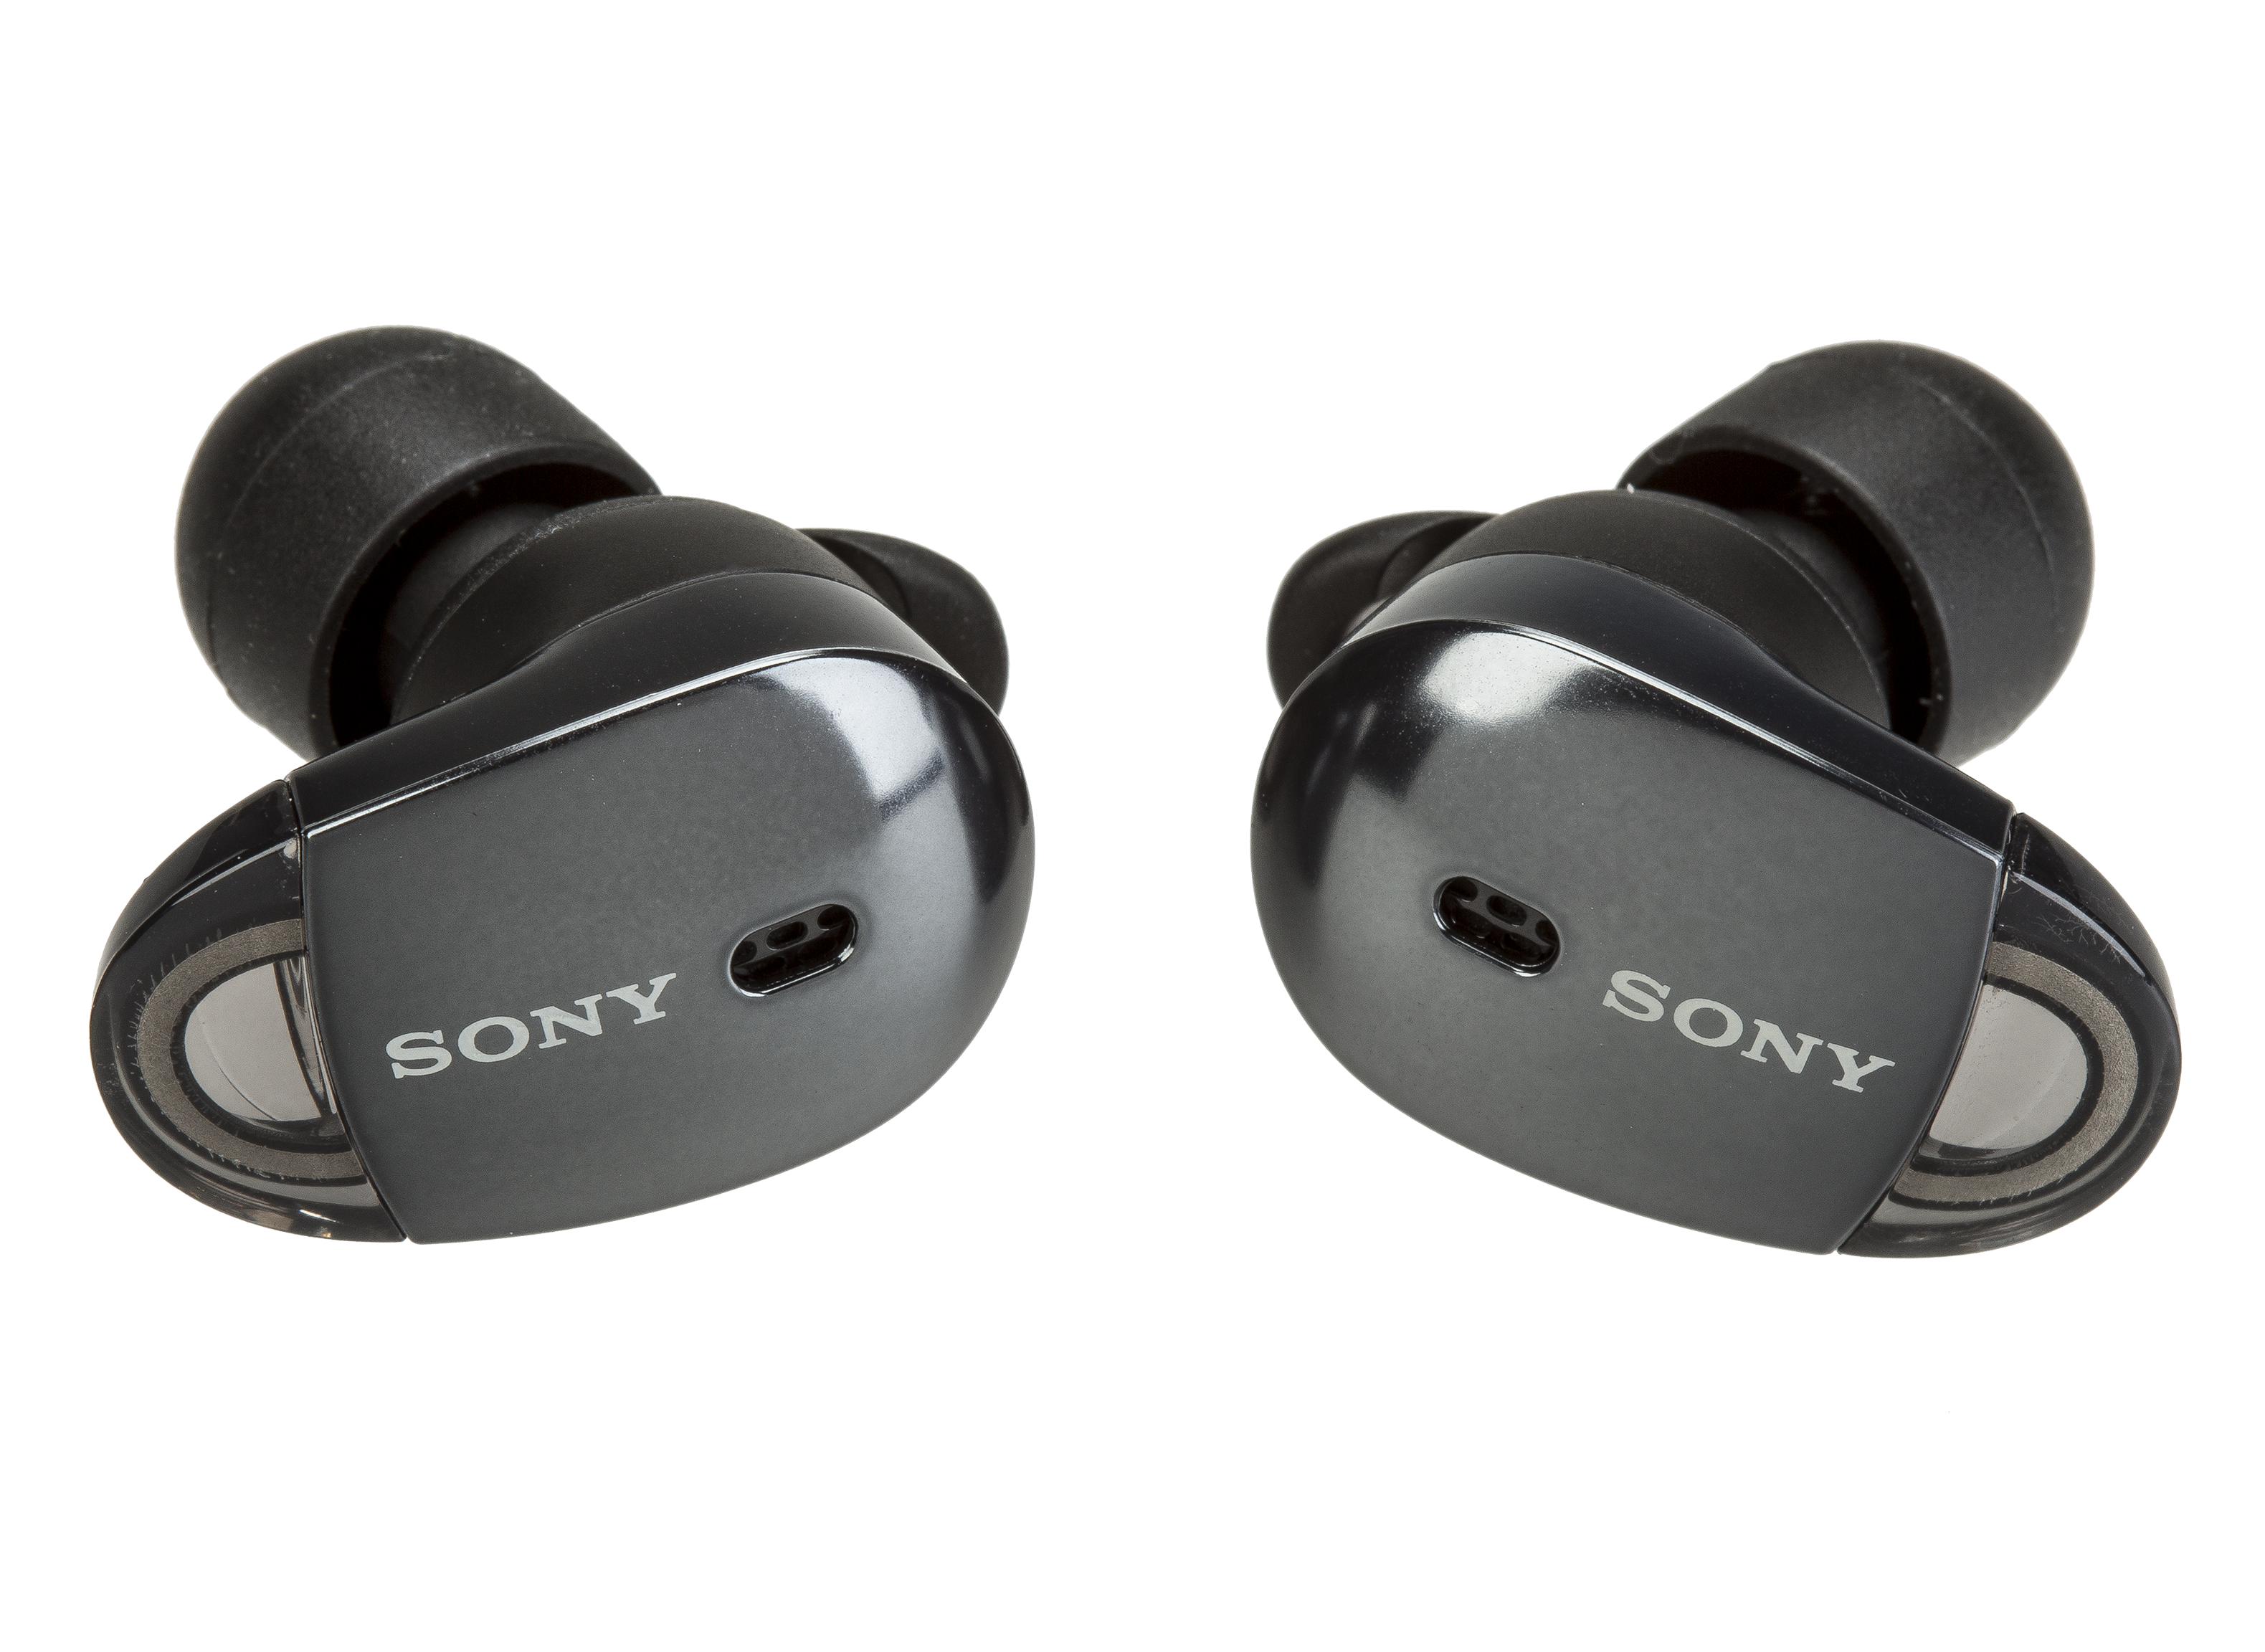 Sony WF-1000X Headphone Review - Consumer Reports